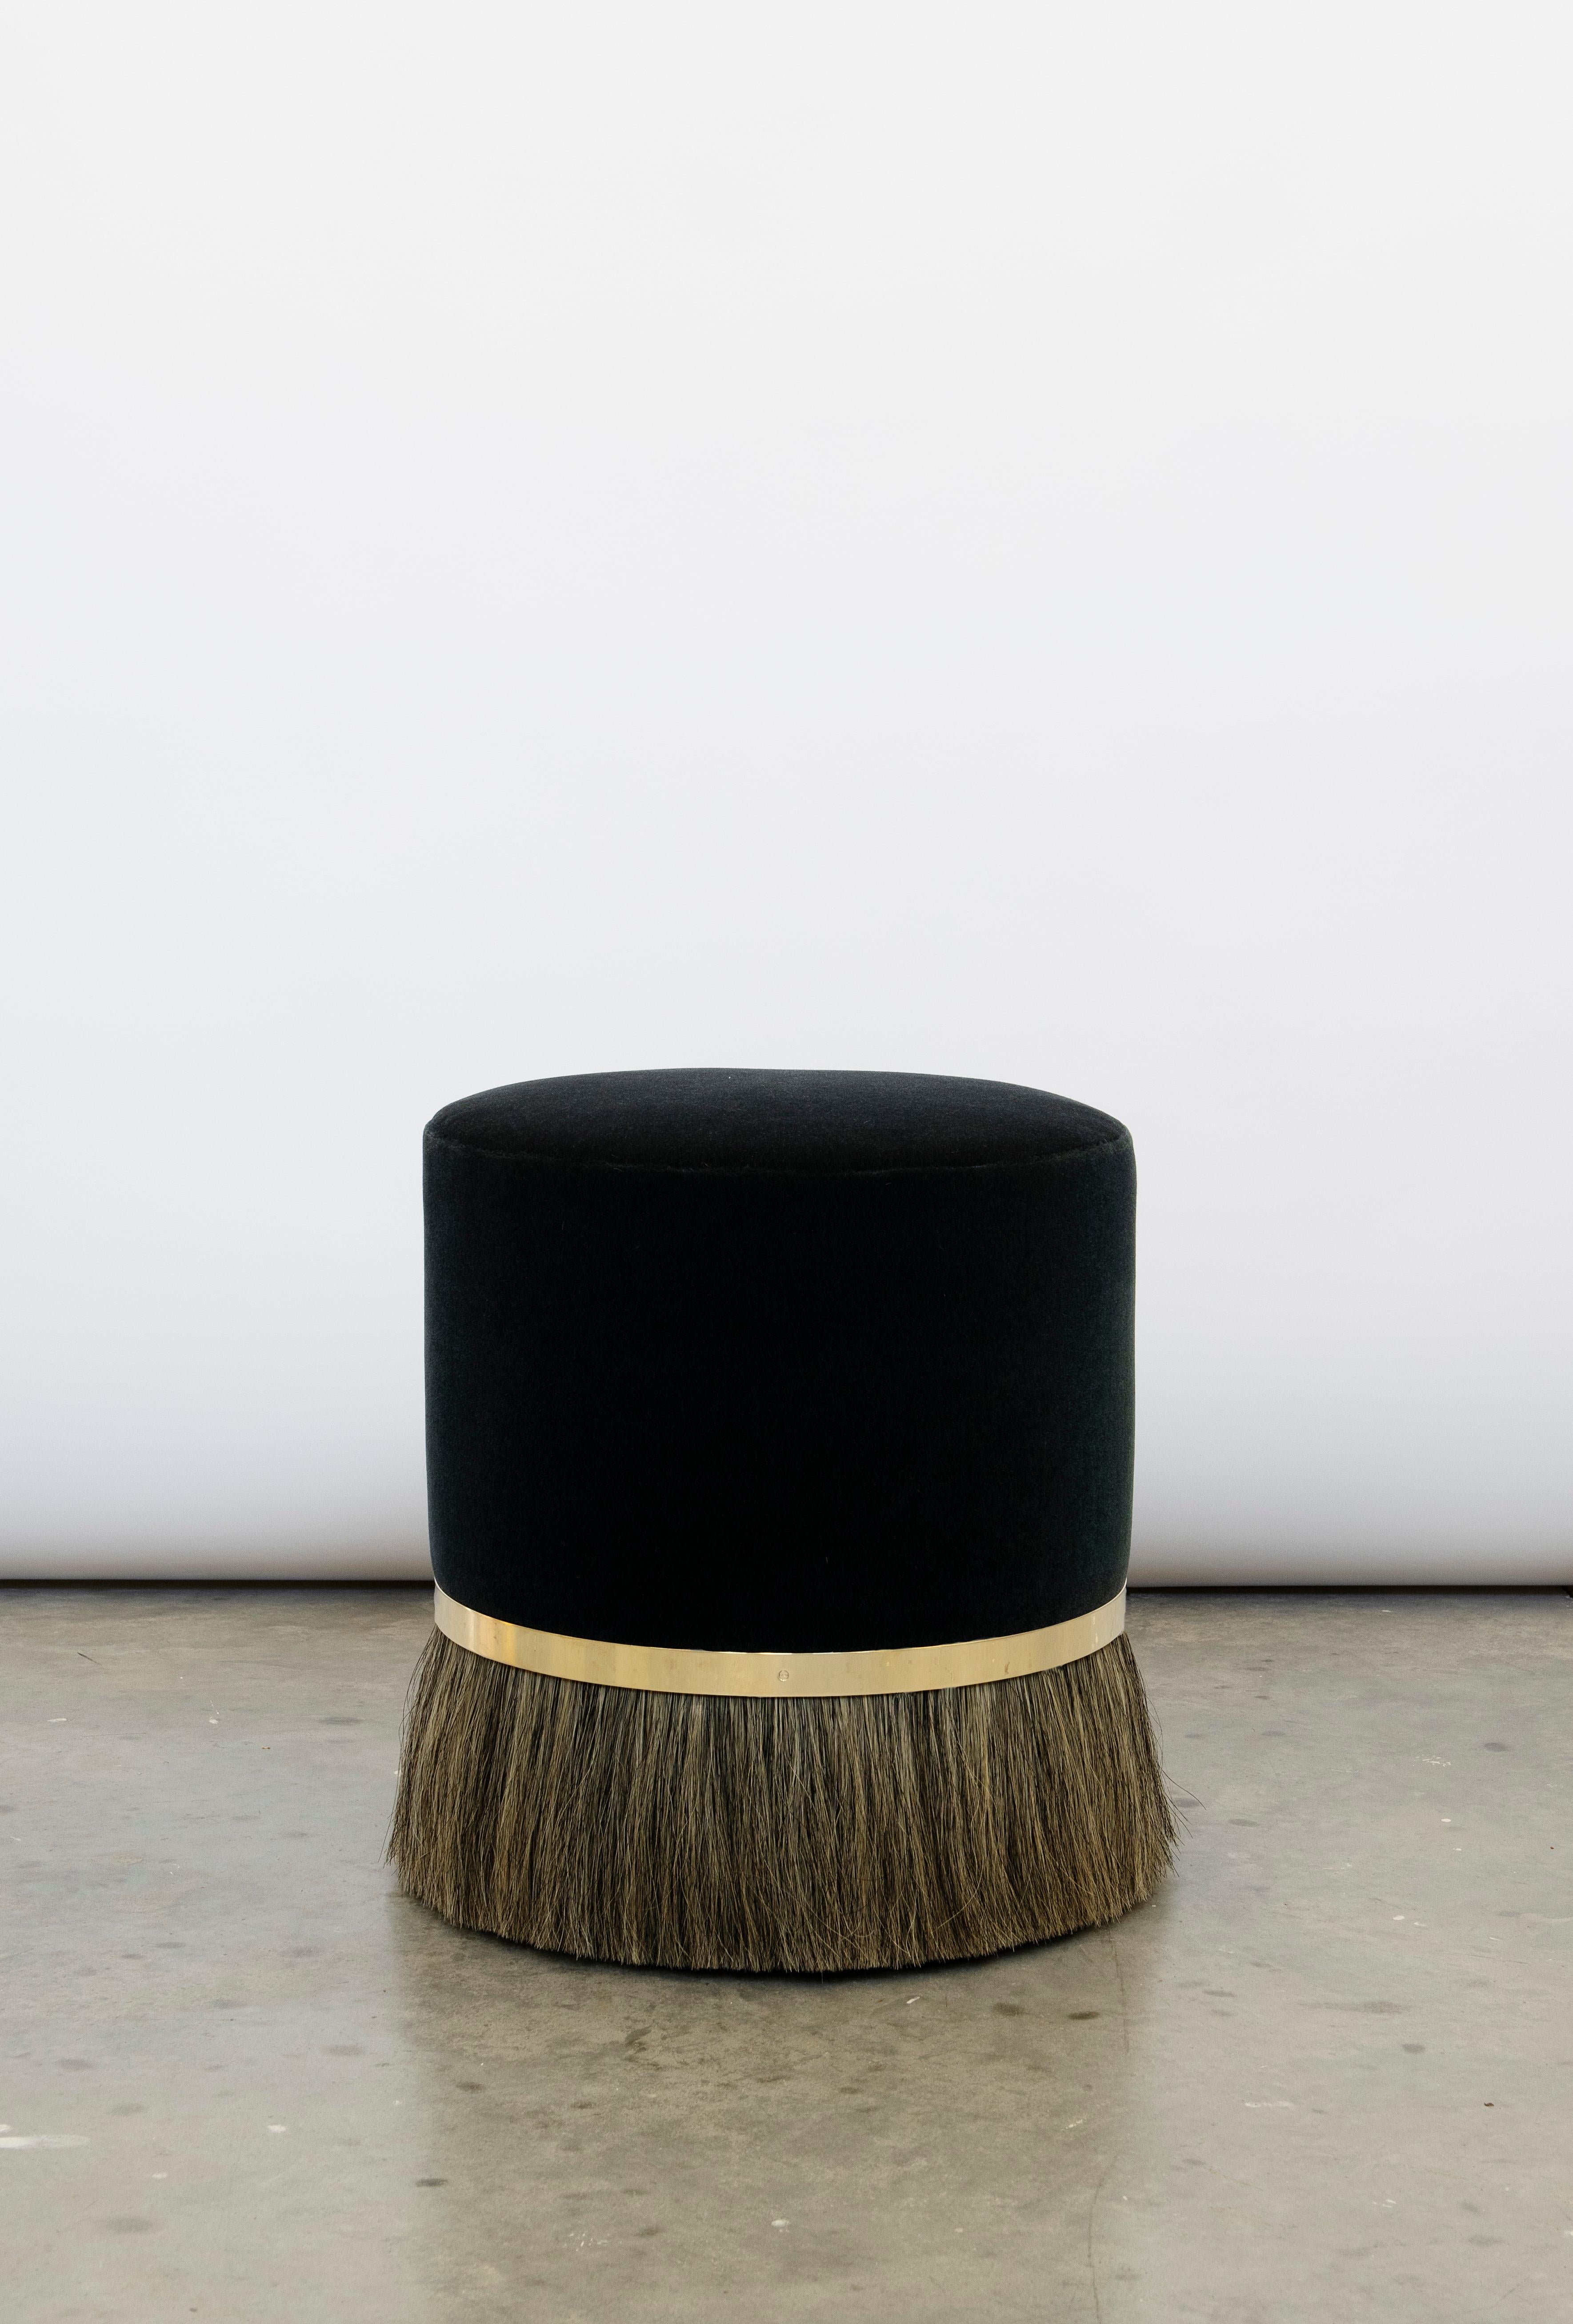 American 2 Thing 3 Stool with Horse Hair, Brass and Mohair